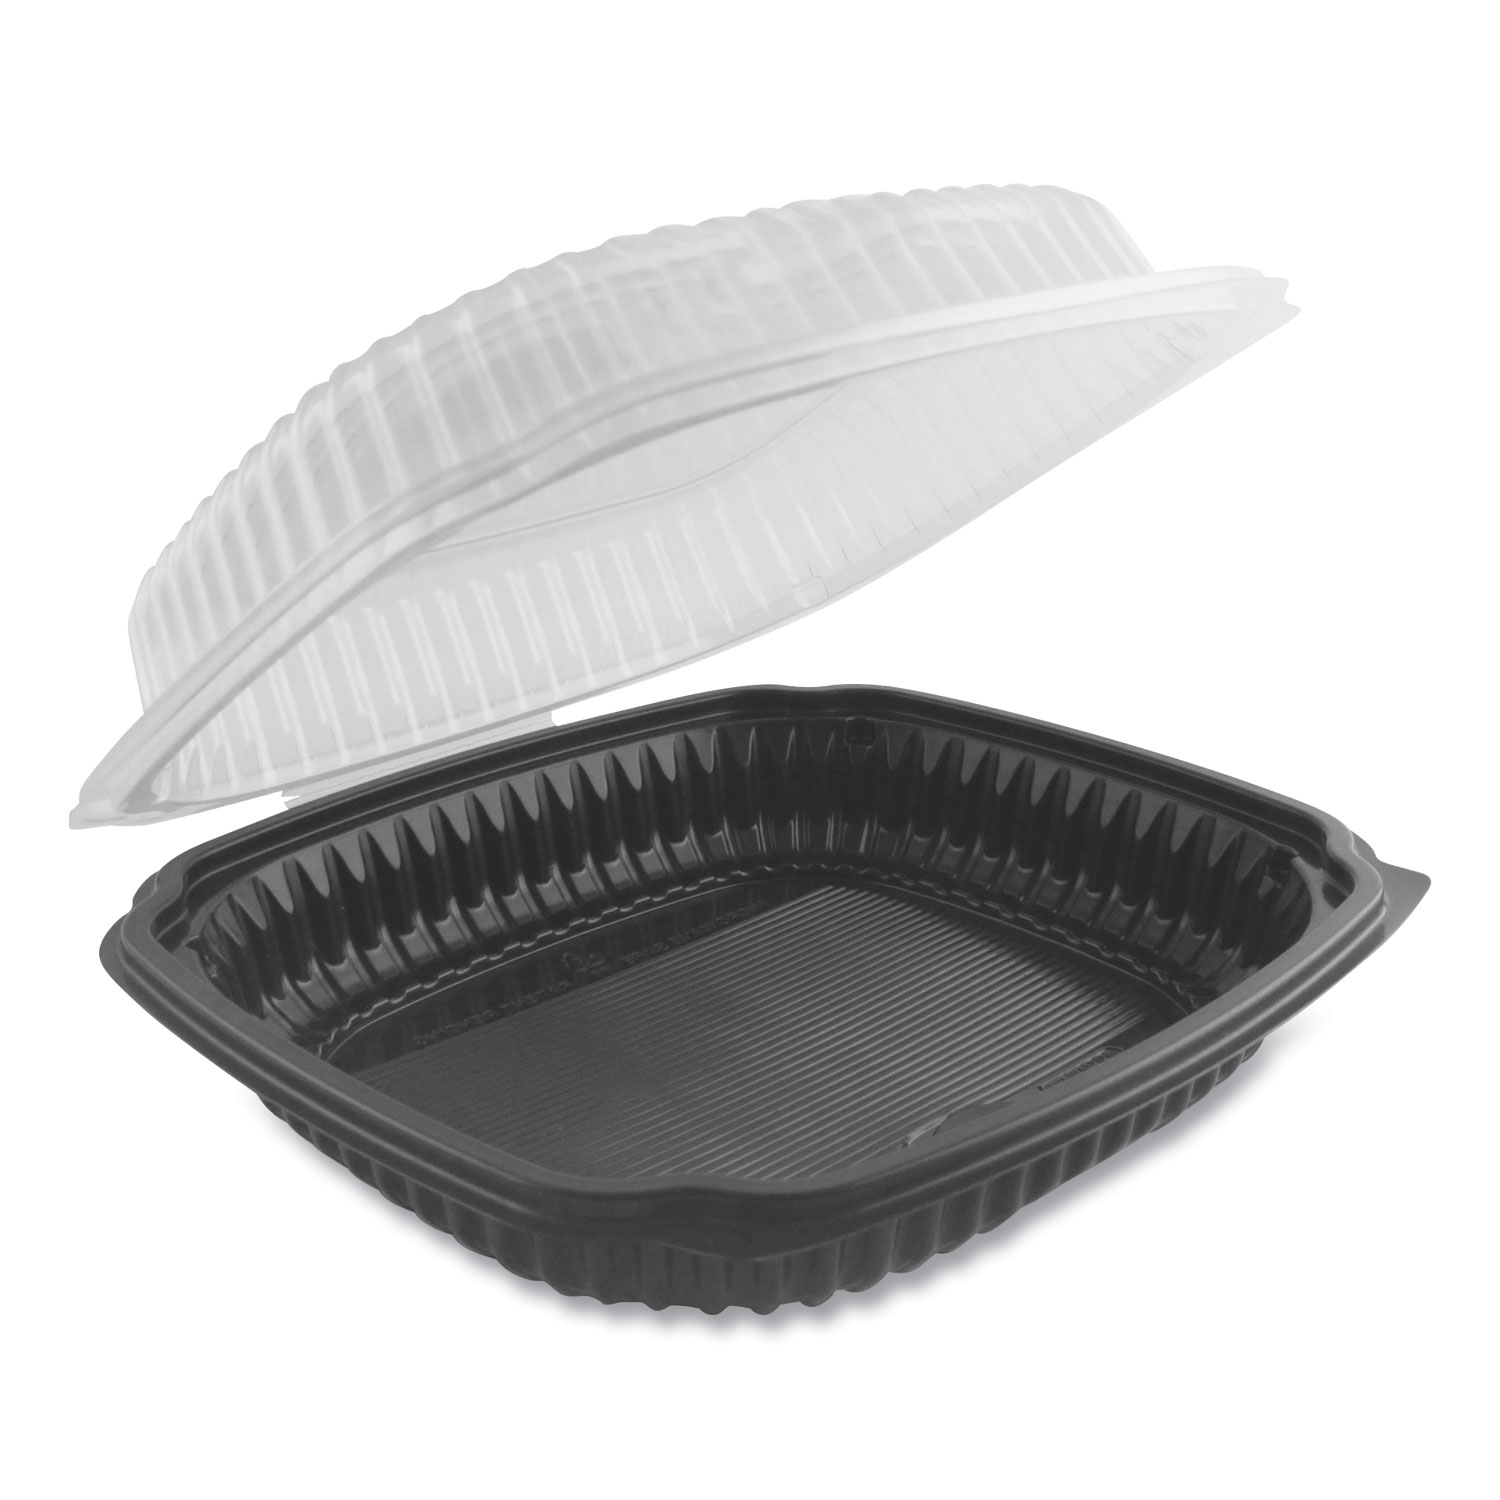  Anchor Packaging 4699911 Culinary Lites Microwavable Container, 39 oz, 9 x 9 x 3.01, Clear/Black, 100/Carton (ANZ4699911) 